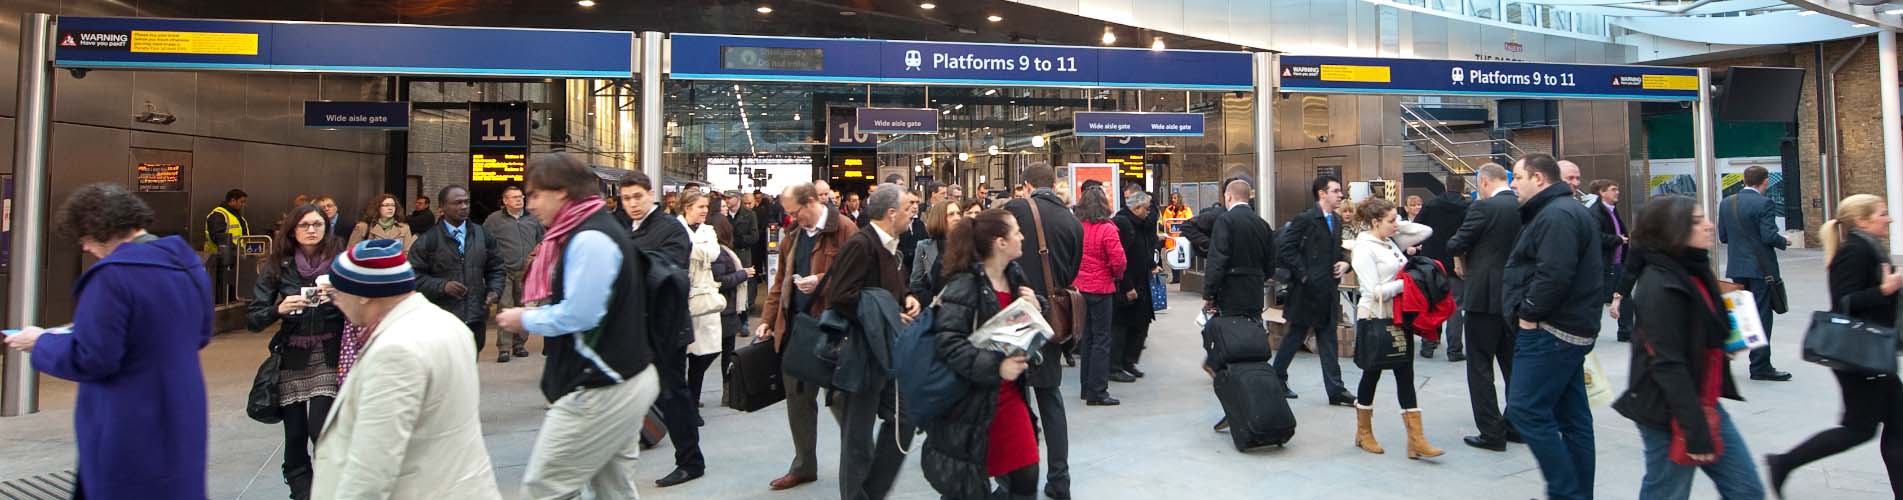 Passengers at King's Cross railway station in London